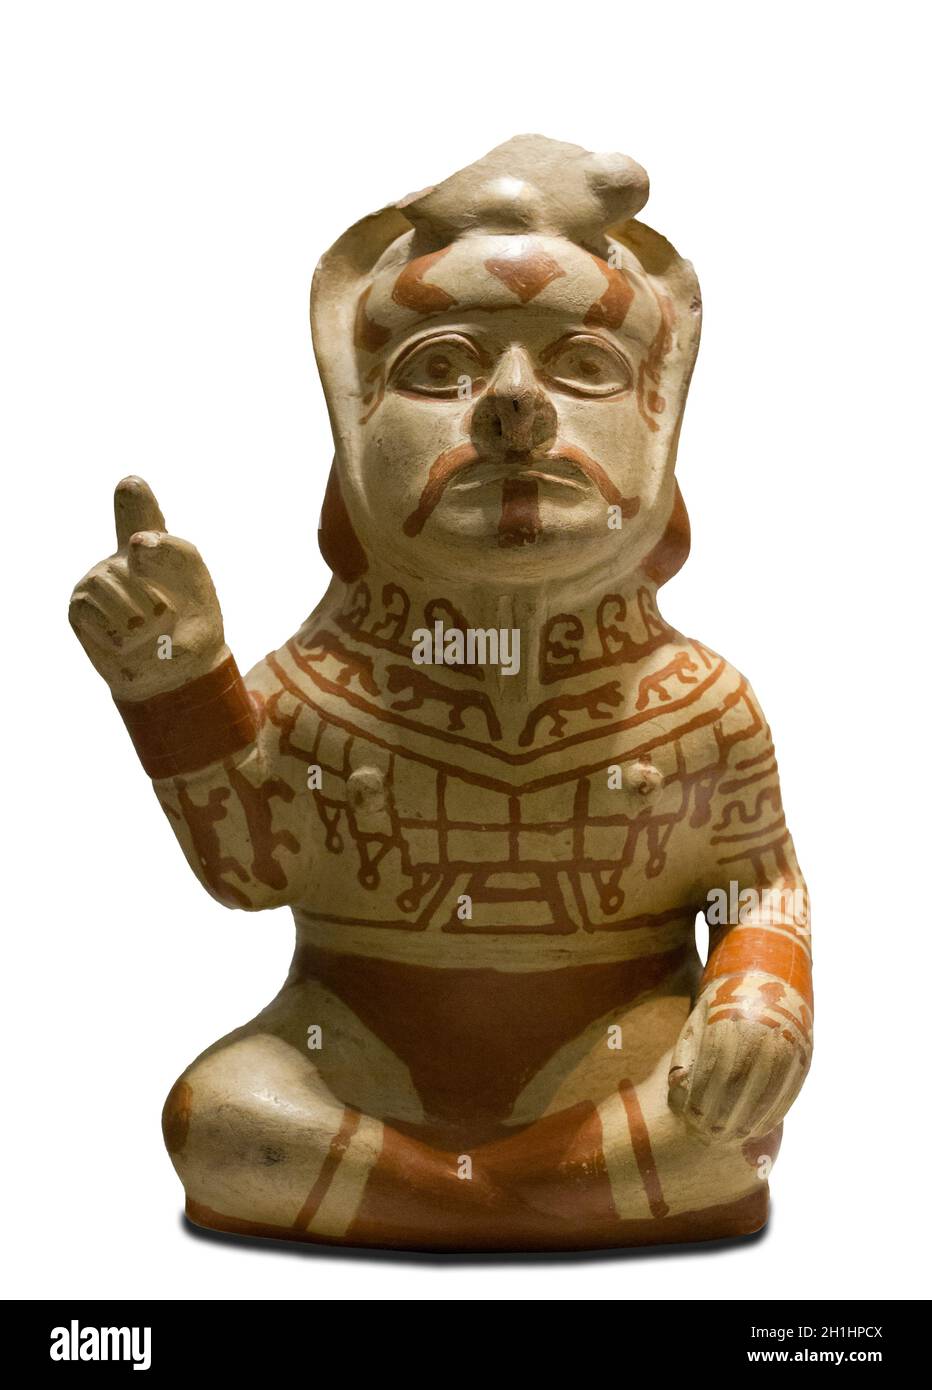 Madrid, Spain - Jul 11th, 2020: Moche culture vessel depicting chief in command attitude. Museum of the Americas, Madrid, Spain Stock Photo